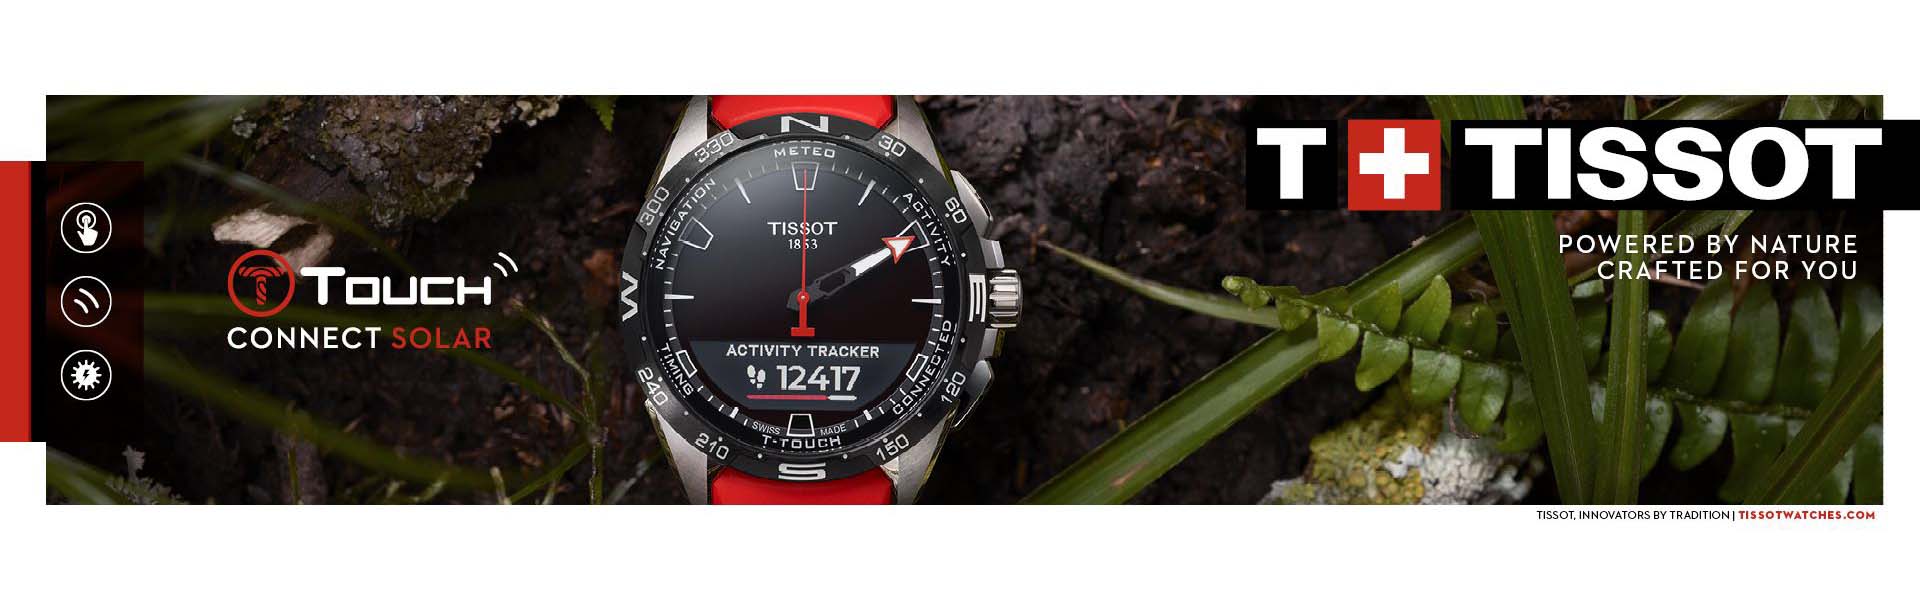 tissot t-touch